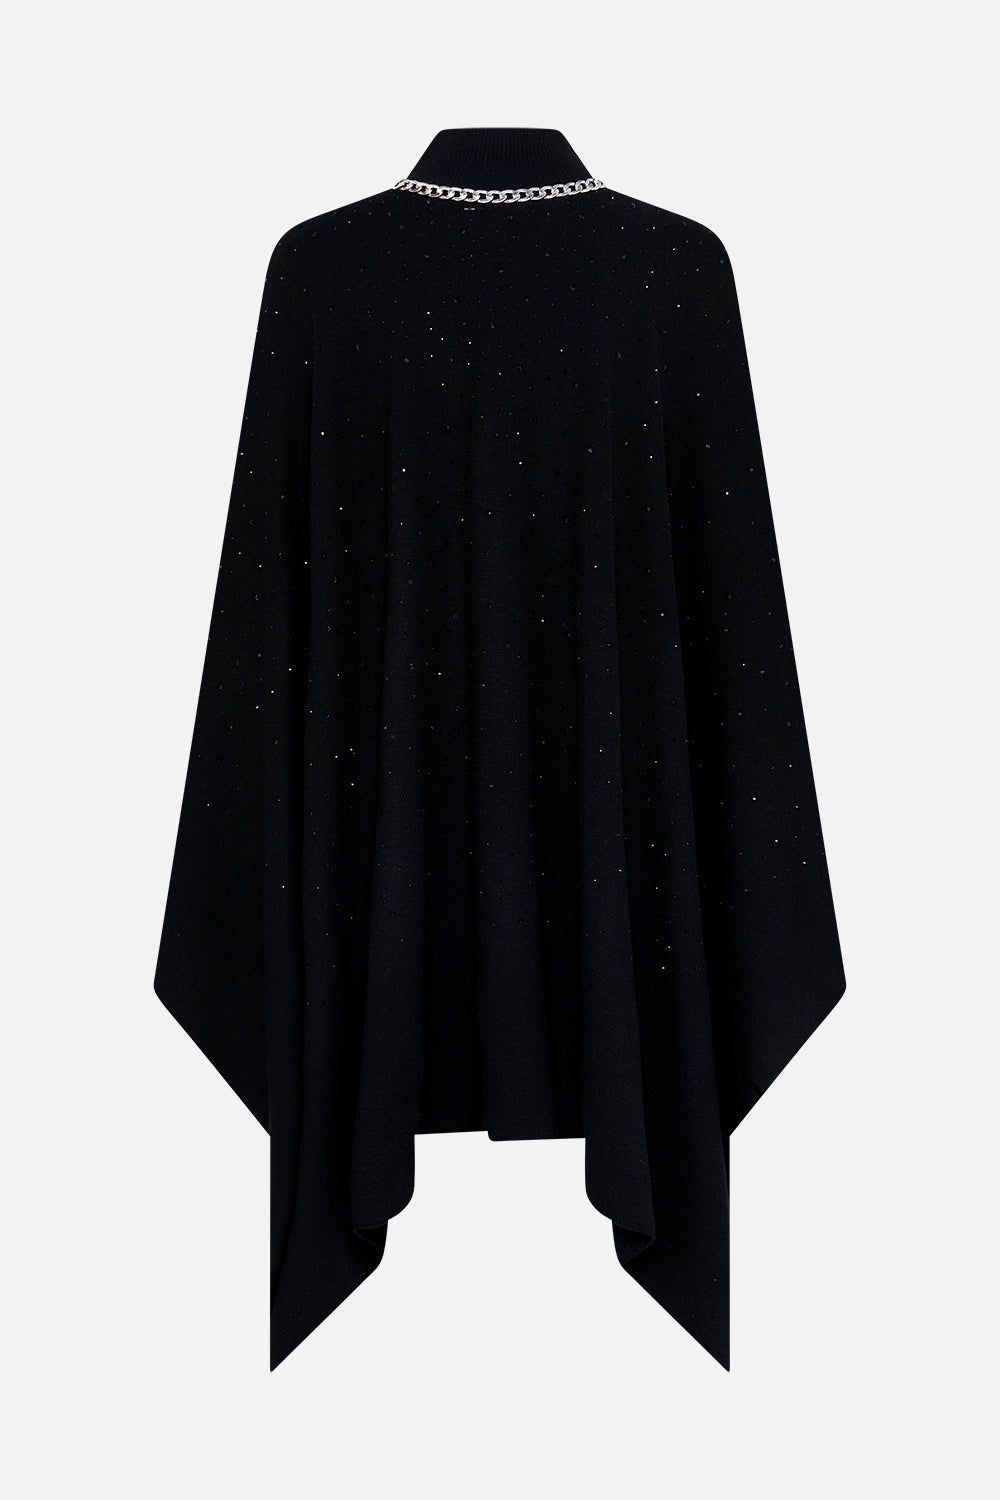 Back product view of CAMILLA black knit poncho in Chaos Magic 